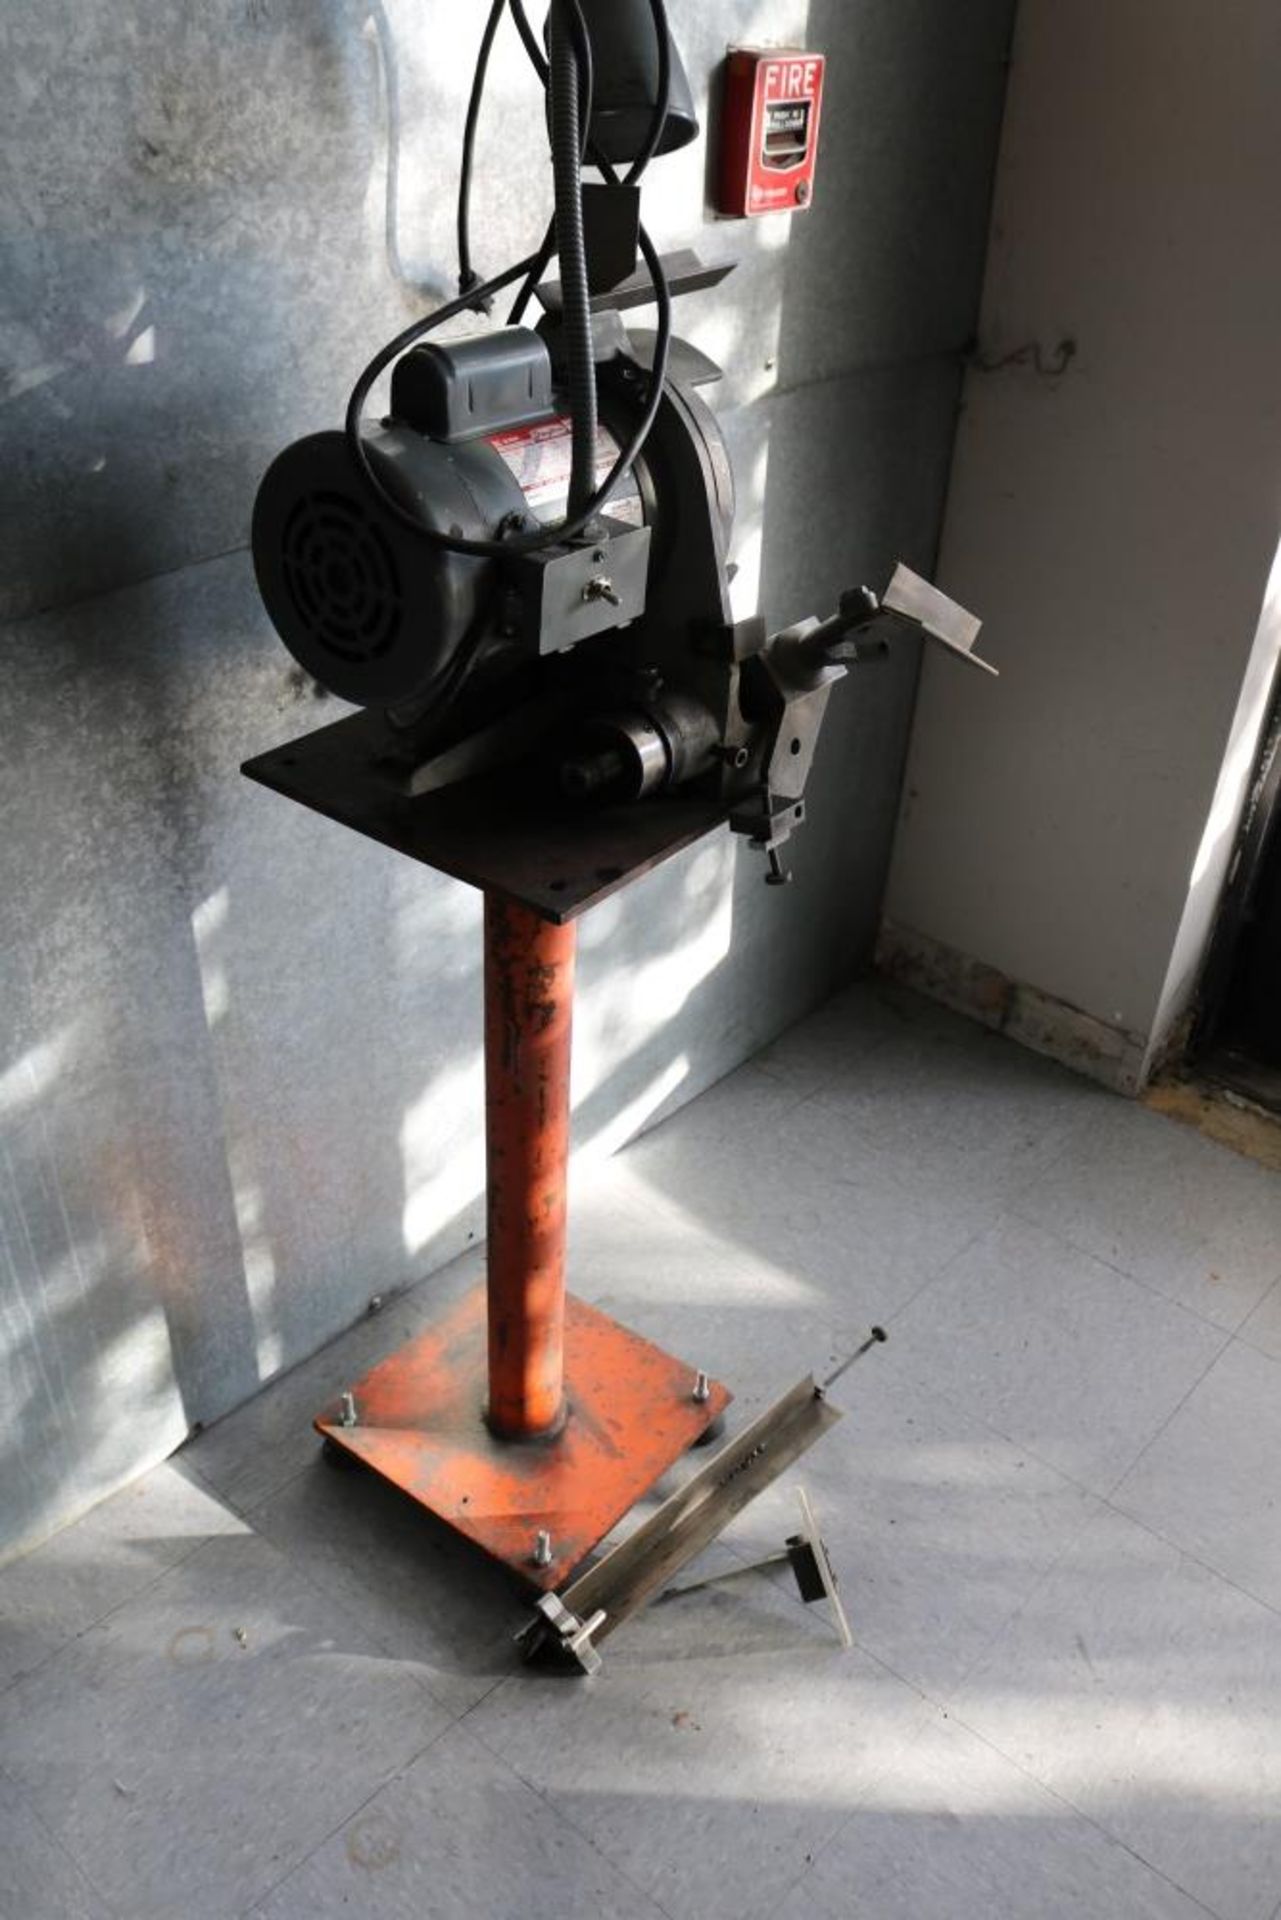 The "Champ" Model/6K197B Die Grinder, 1 HP, Drill Grinder with Attachments on Stand - Image 6 of 9